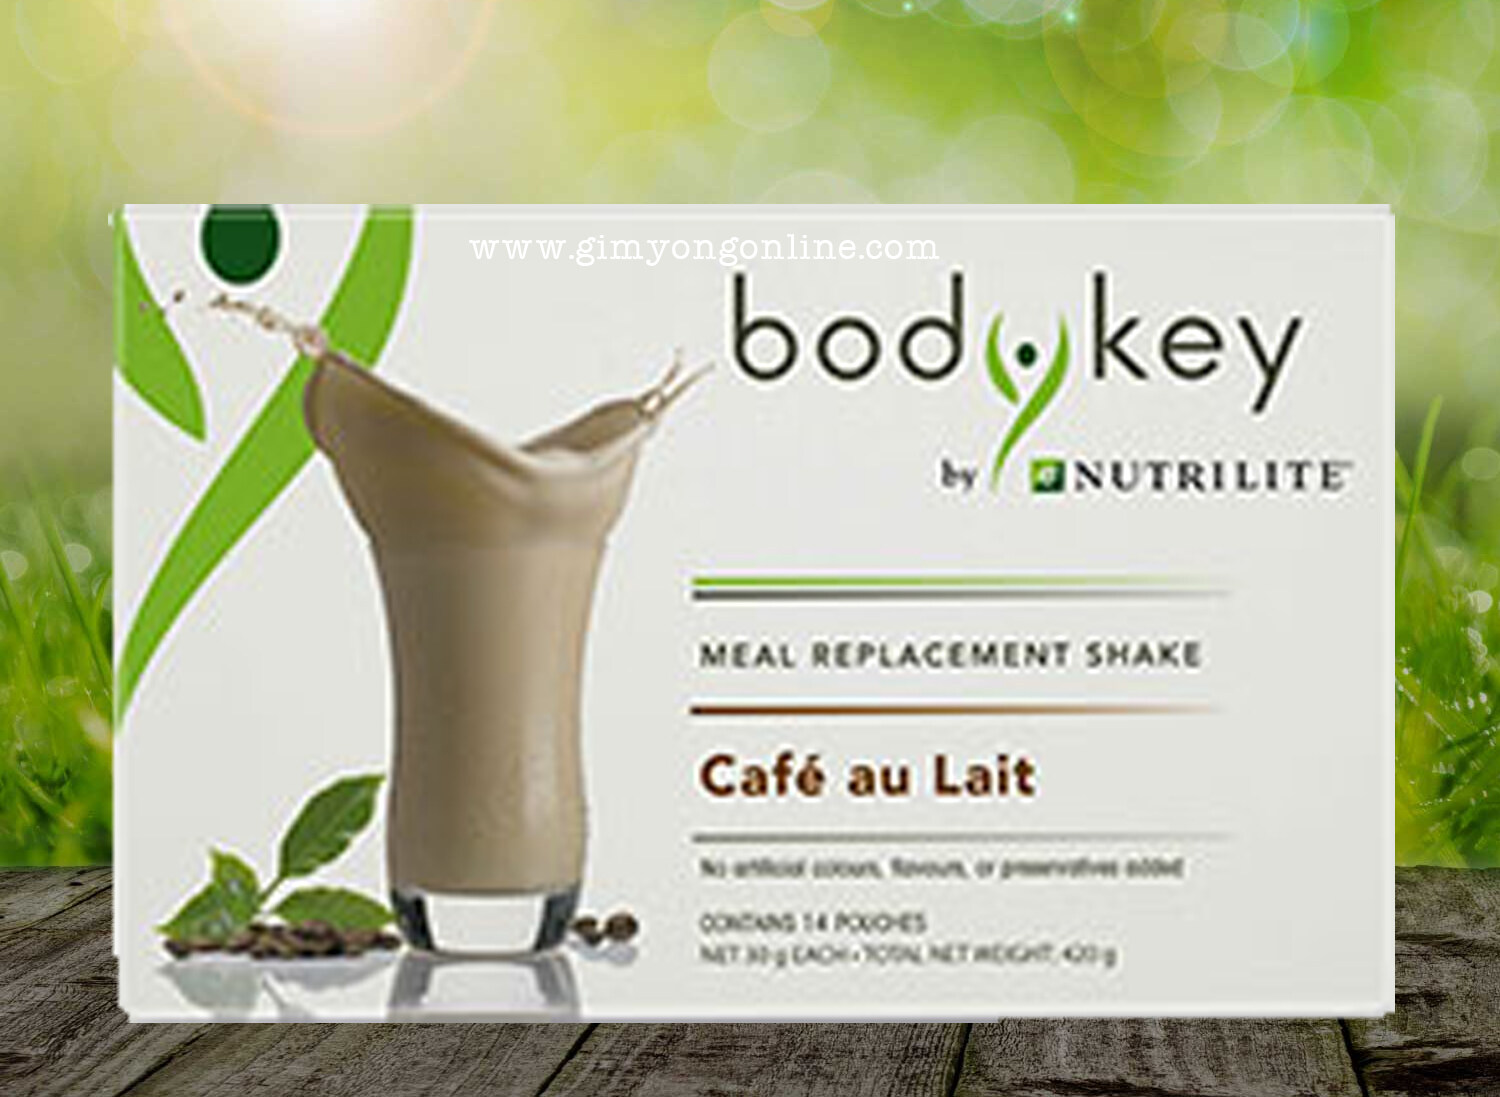 Amway bodykey Cafe Au Lait Flavour, Body Key Nutrilite, 100% meal replacement product exp:4/2022